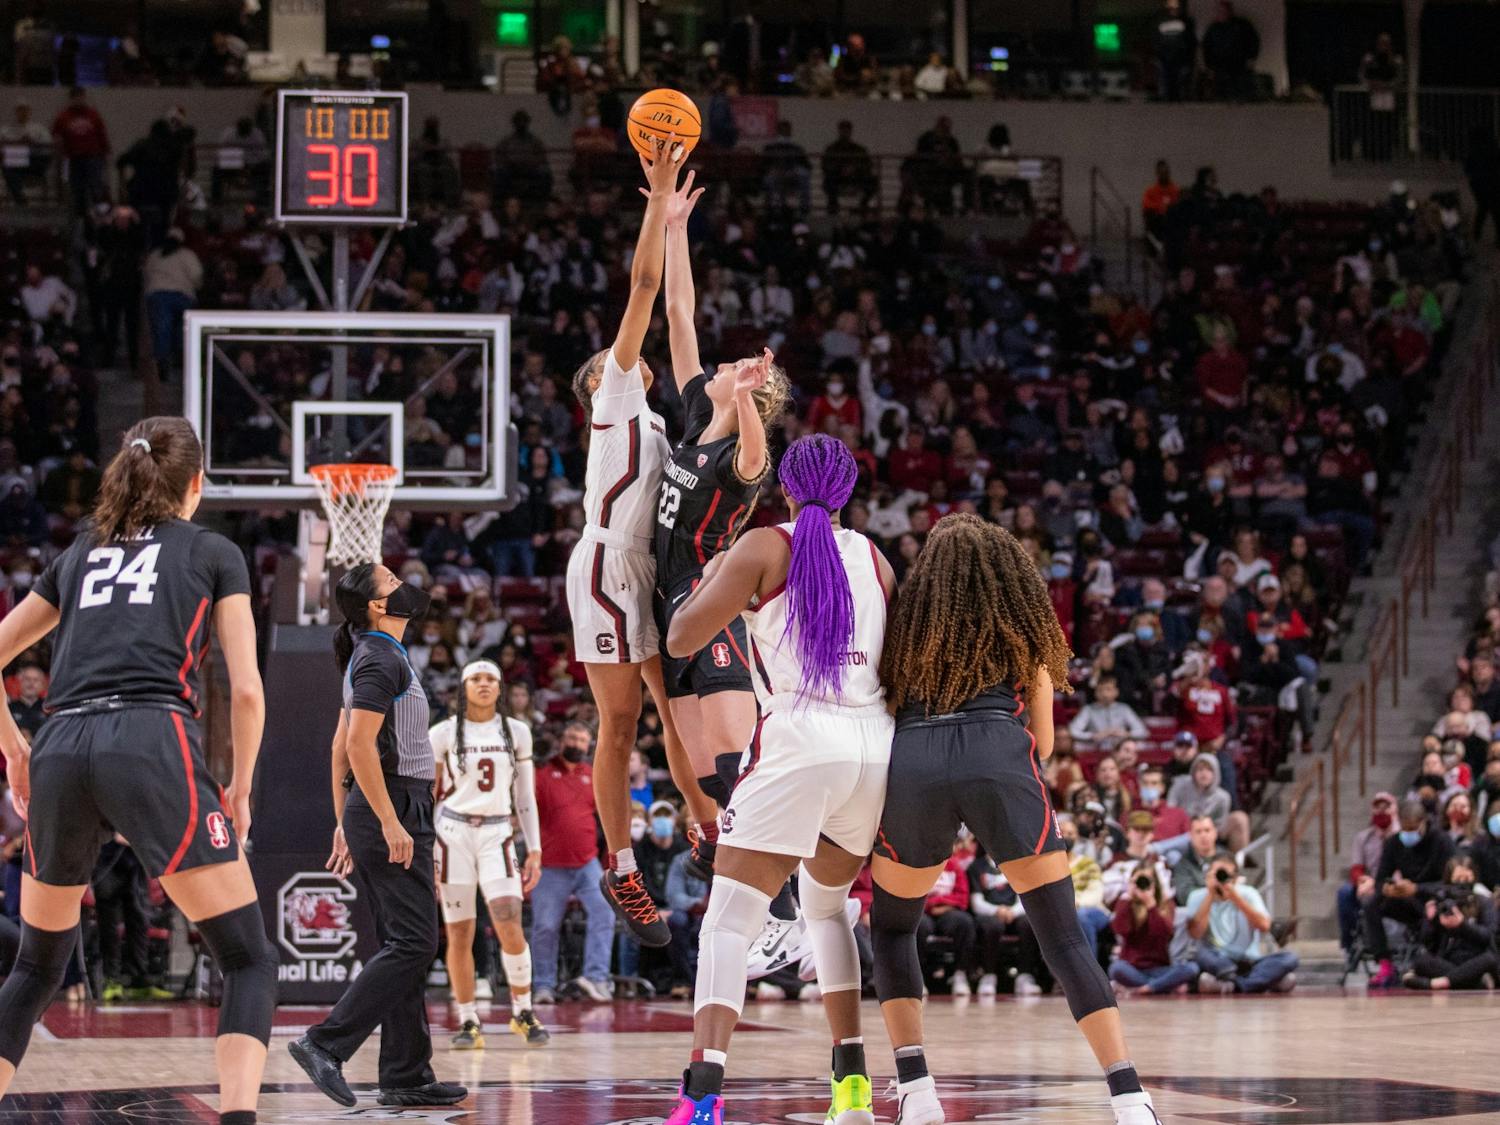 Senior forward Victaria Saxton works to gain possession of the ball during the tip-off on Dec. 22, 2021. The Gamecocks head to Mississippi to battle the Rebels on Jan. 27, 2022